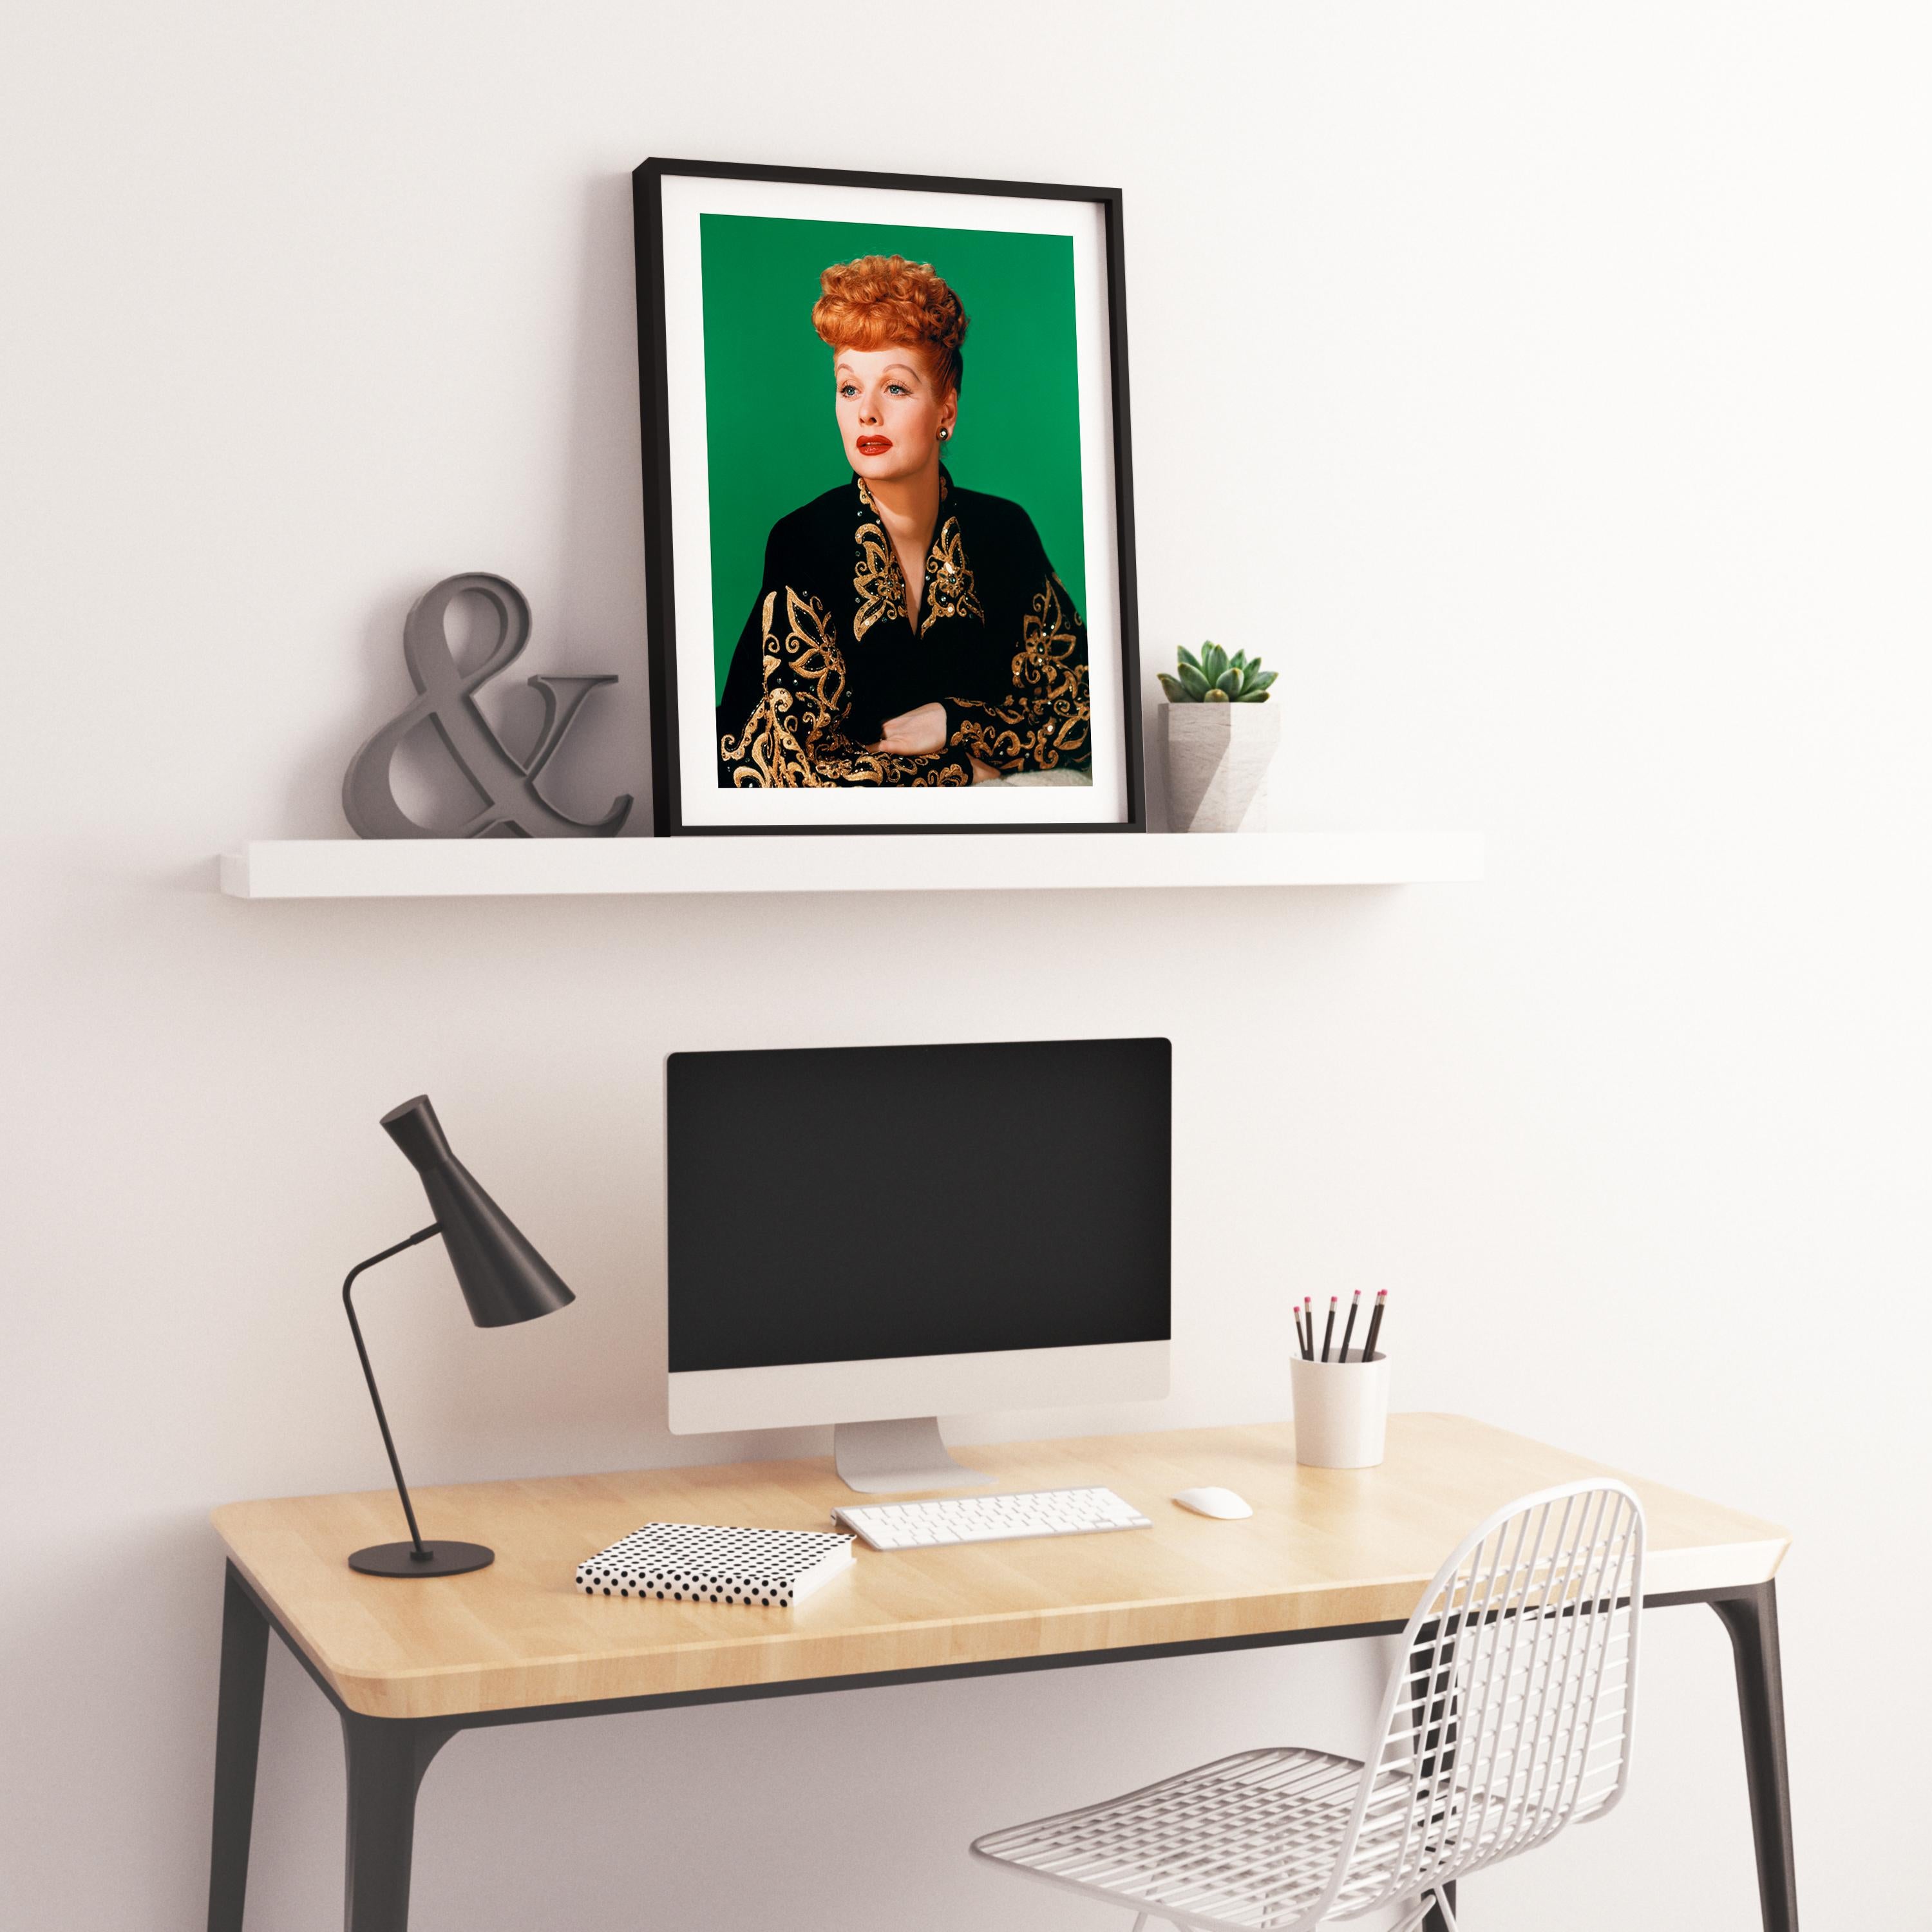 This awesome color capture features Lucille Ball posed in the studio, smiling against a green background.

Lucille Ball was an American actress, comedian, model, entertainment studio executive, and producer. She was the star of the self-produced